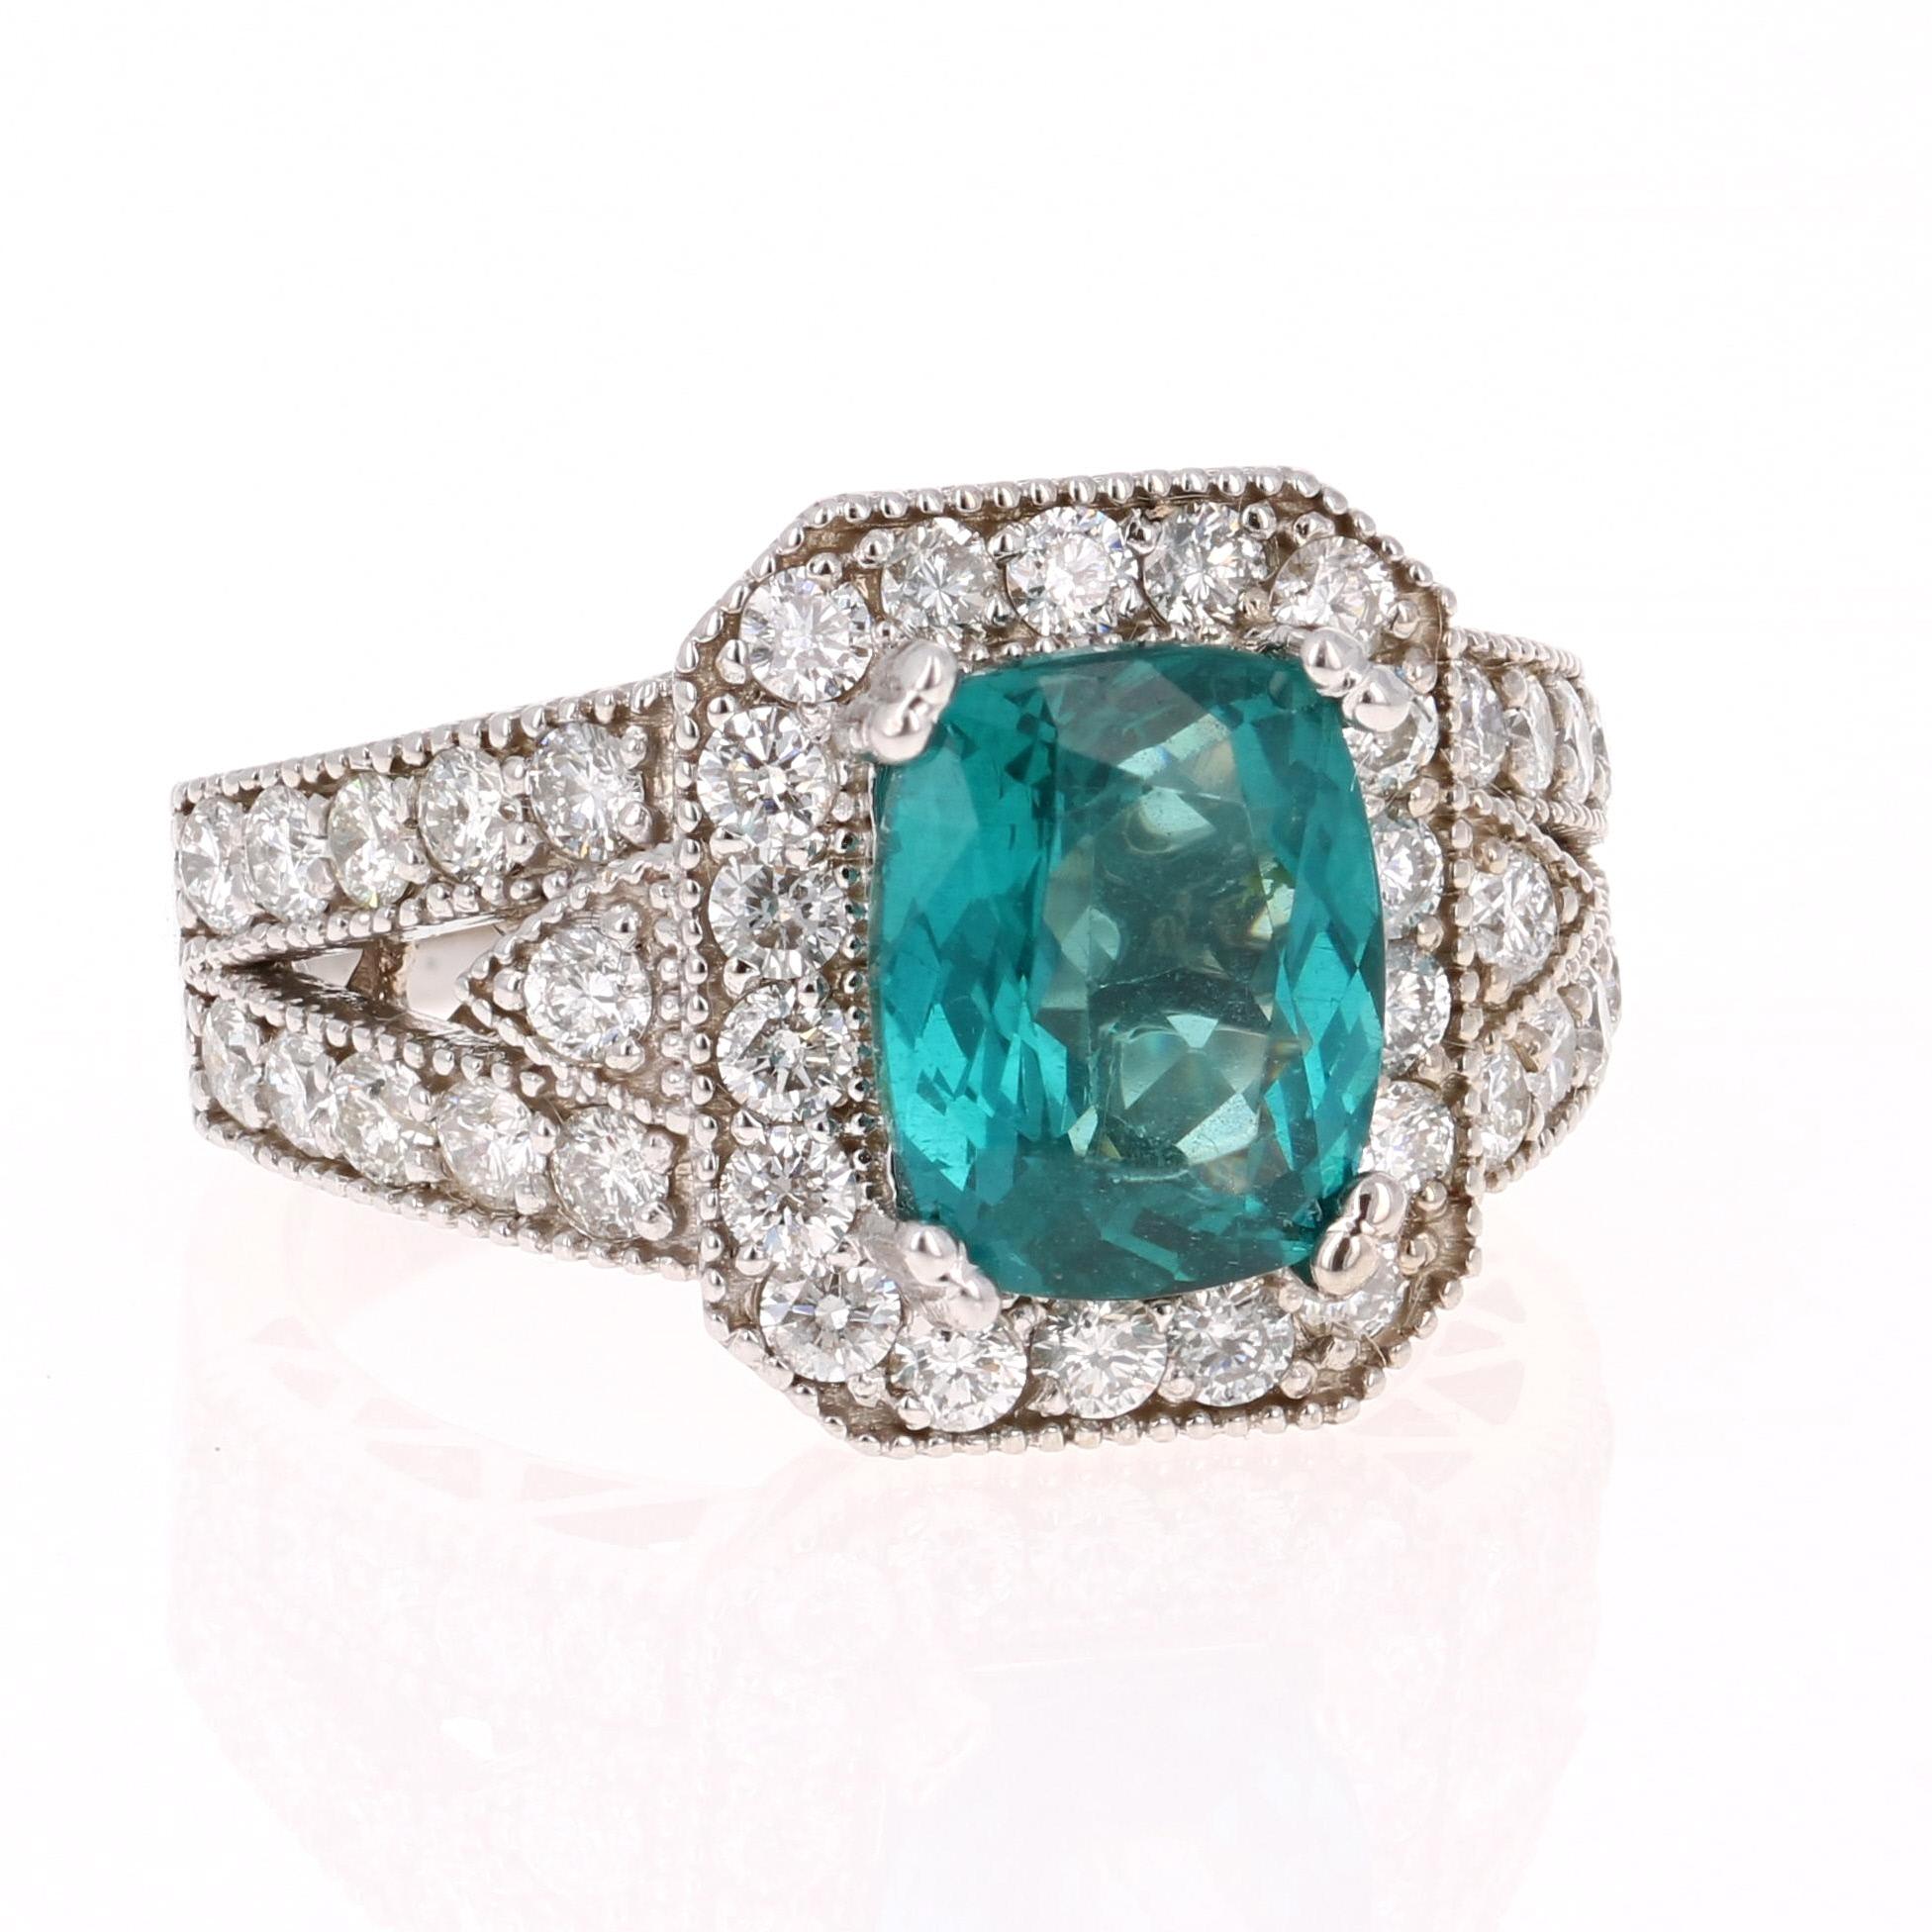 An Apatite Ring set beautifully in White Gold - such a beautiful and unique combination!!

This stunning Apatite and Diamond Ring can easily transform into a unique and classy engagement ring for your special someone!  The ring has a 2.75 Carat